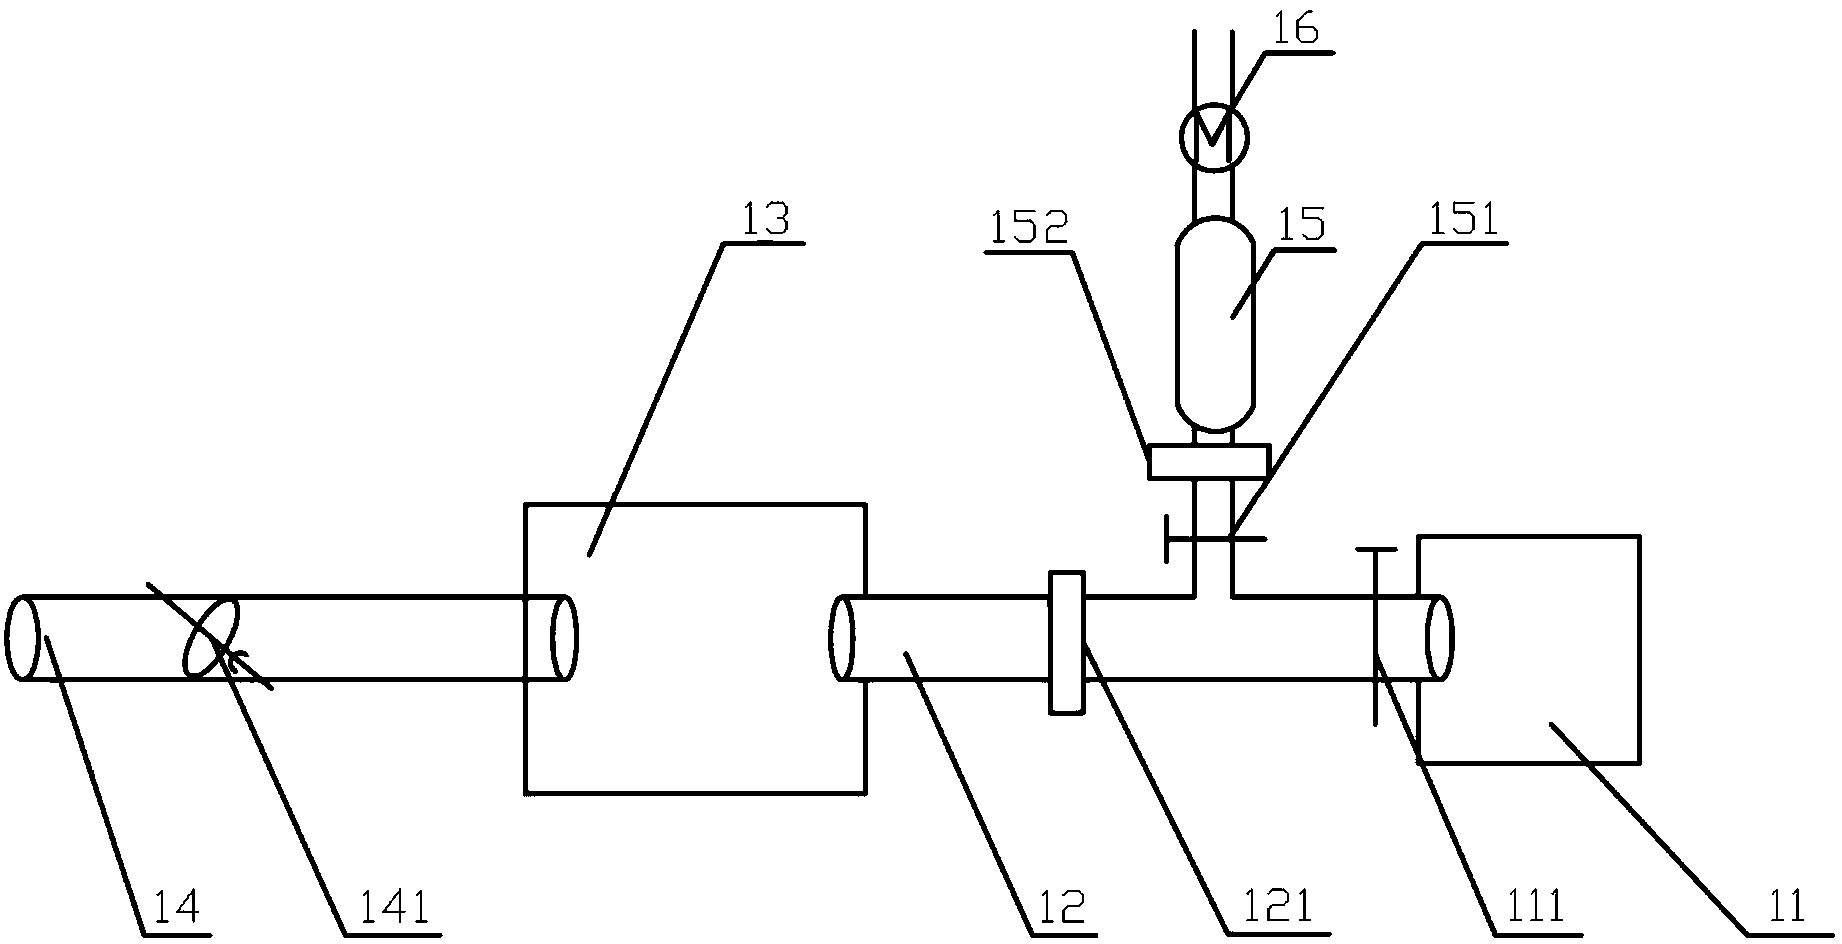 Diesel engine cold start control system and method